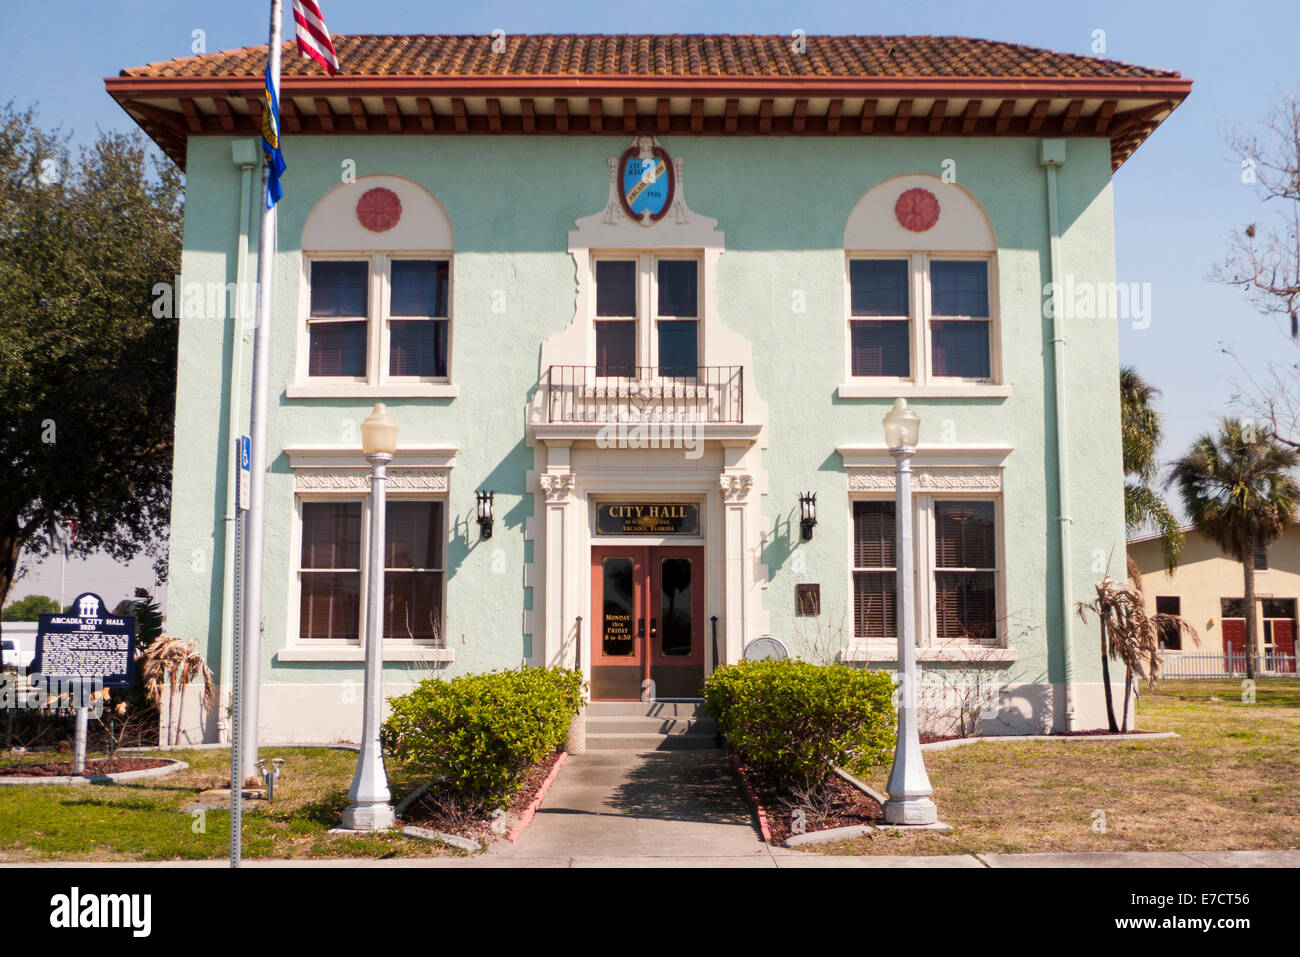 City Hall of the small central Florida town of Arcadia. Stock Photo